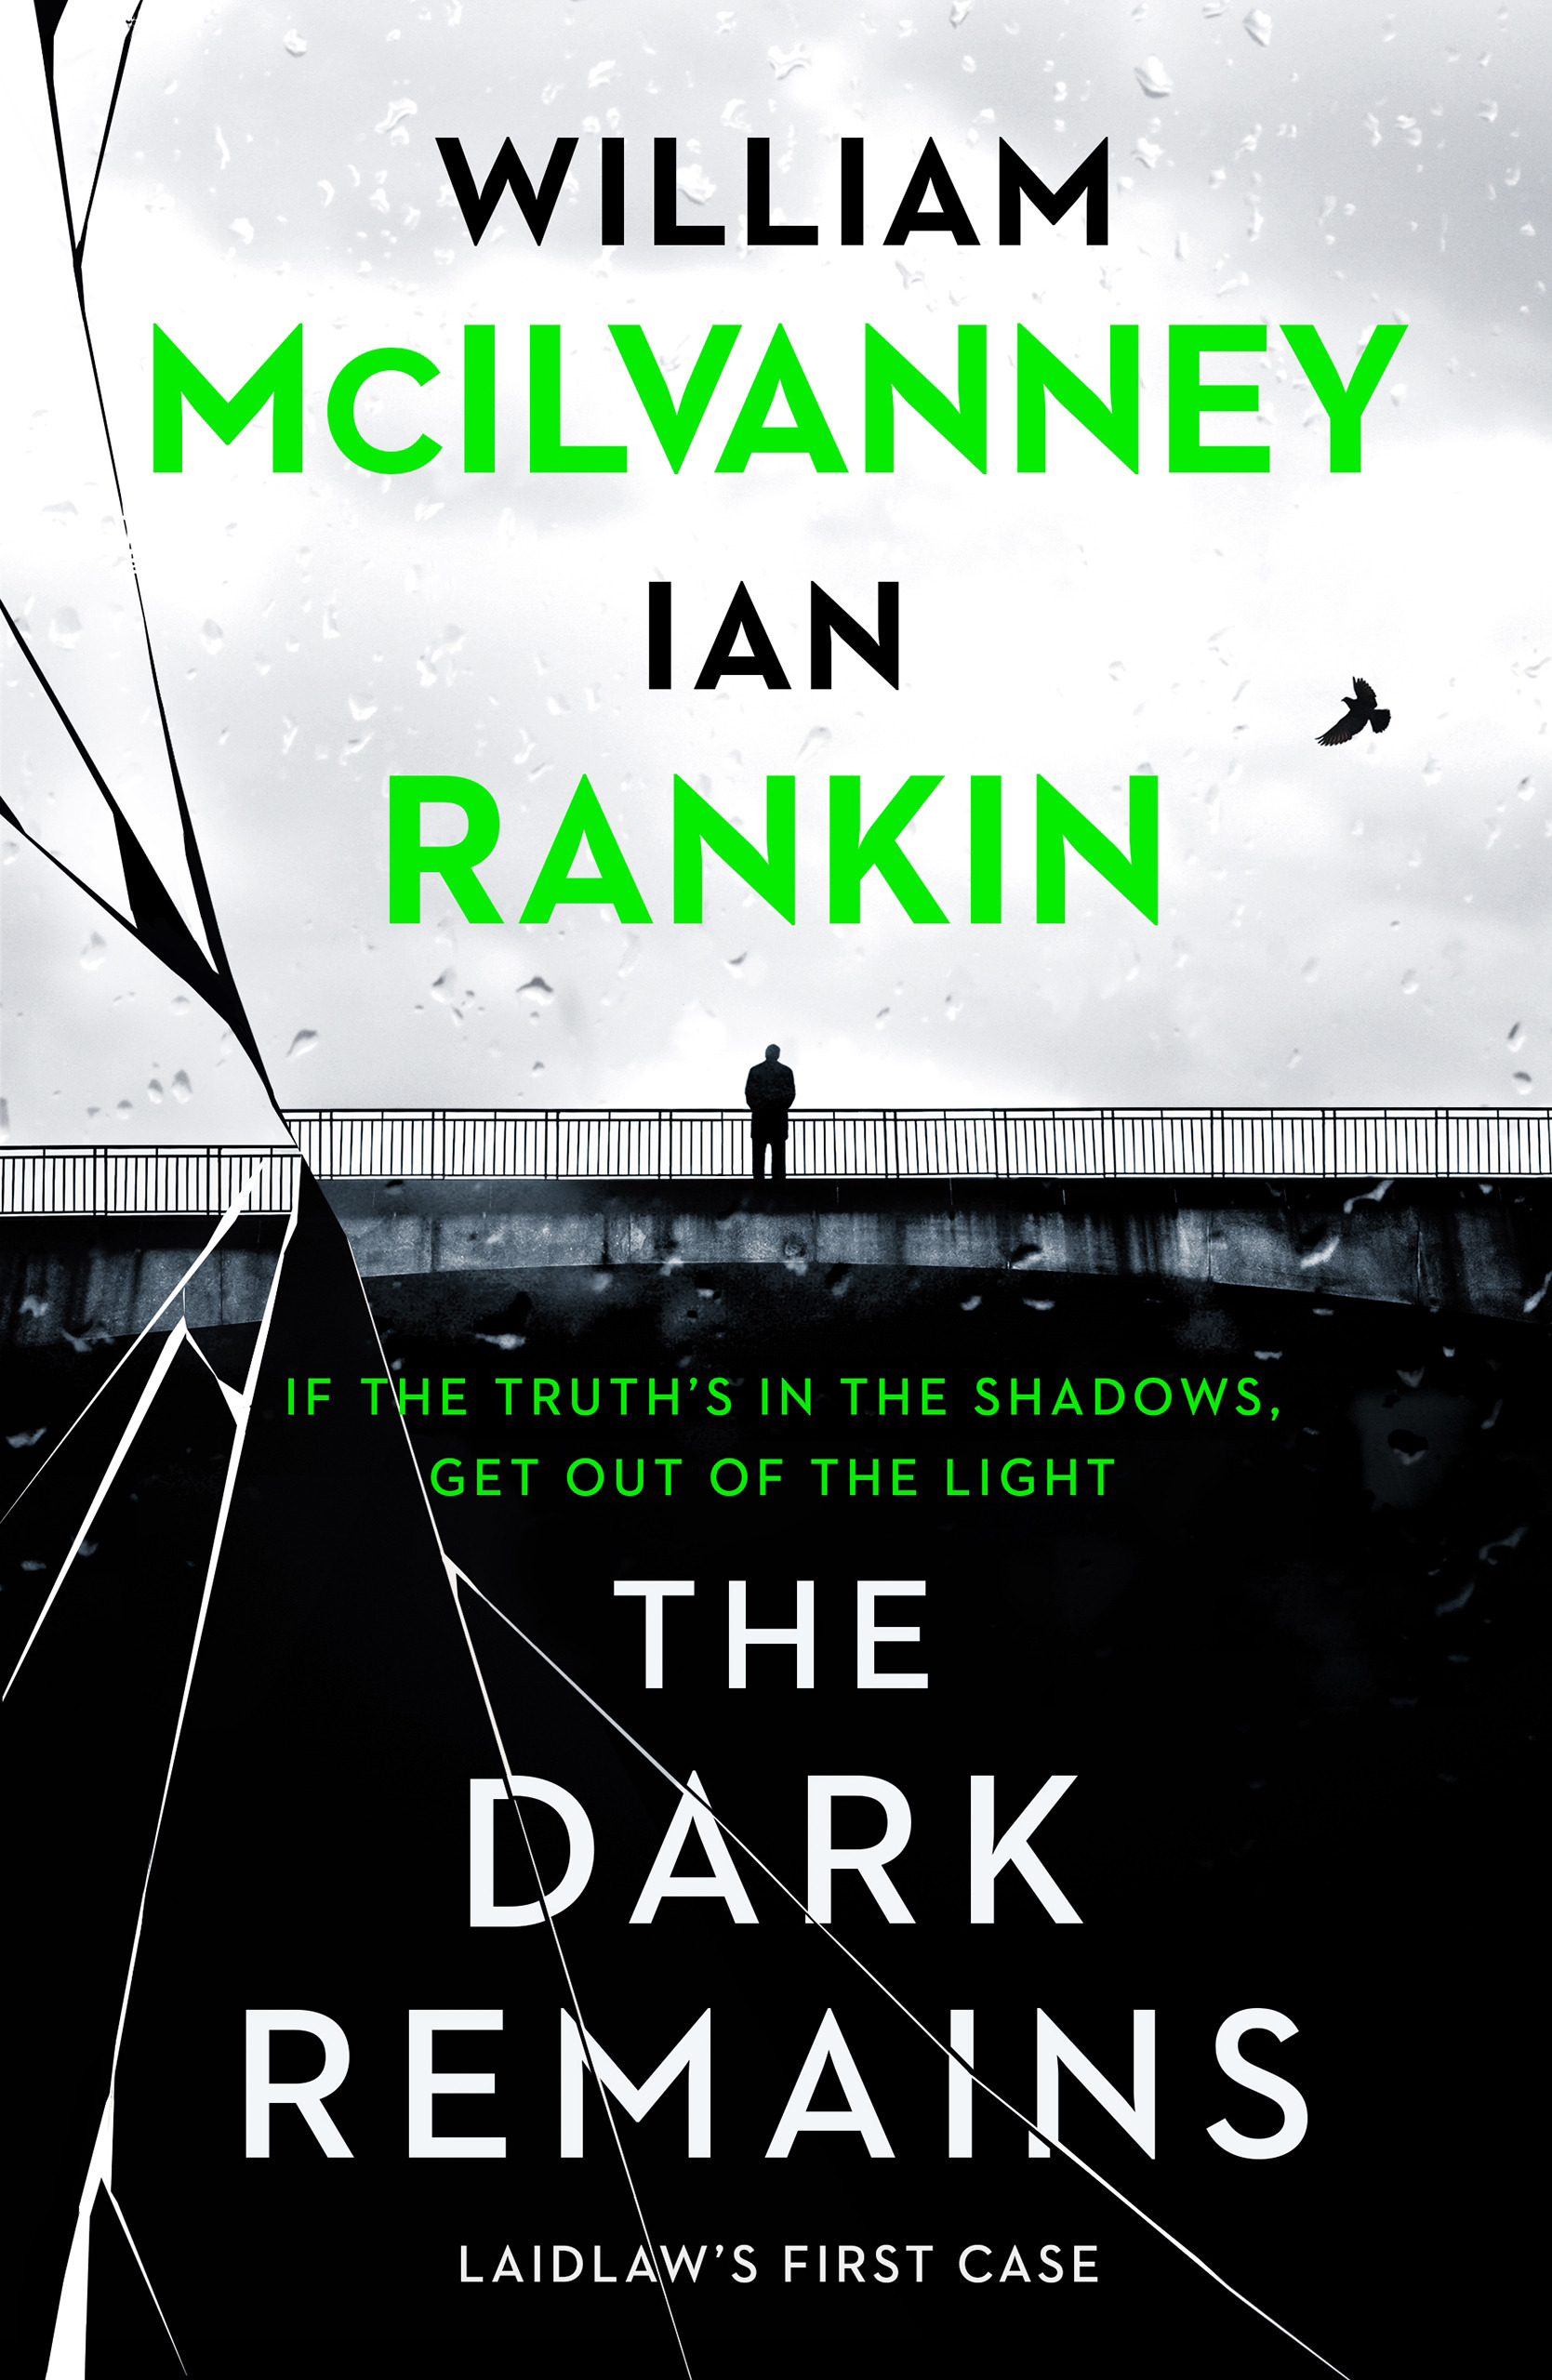 The Dark Remains book cover